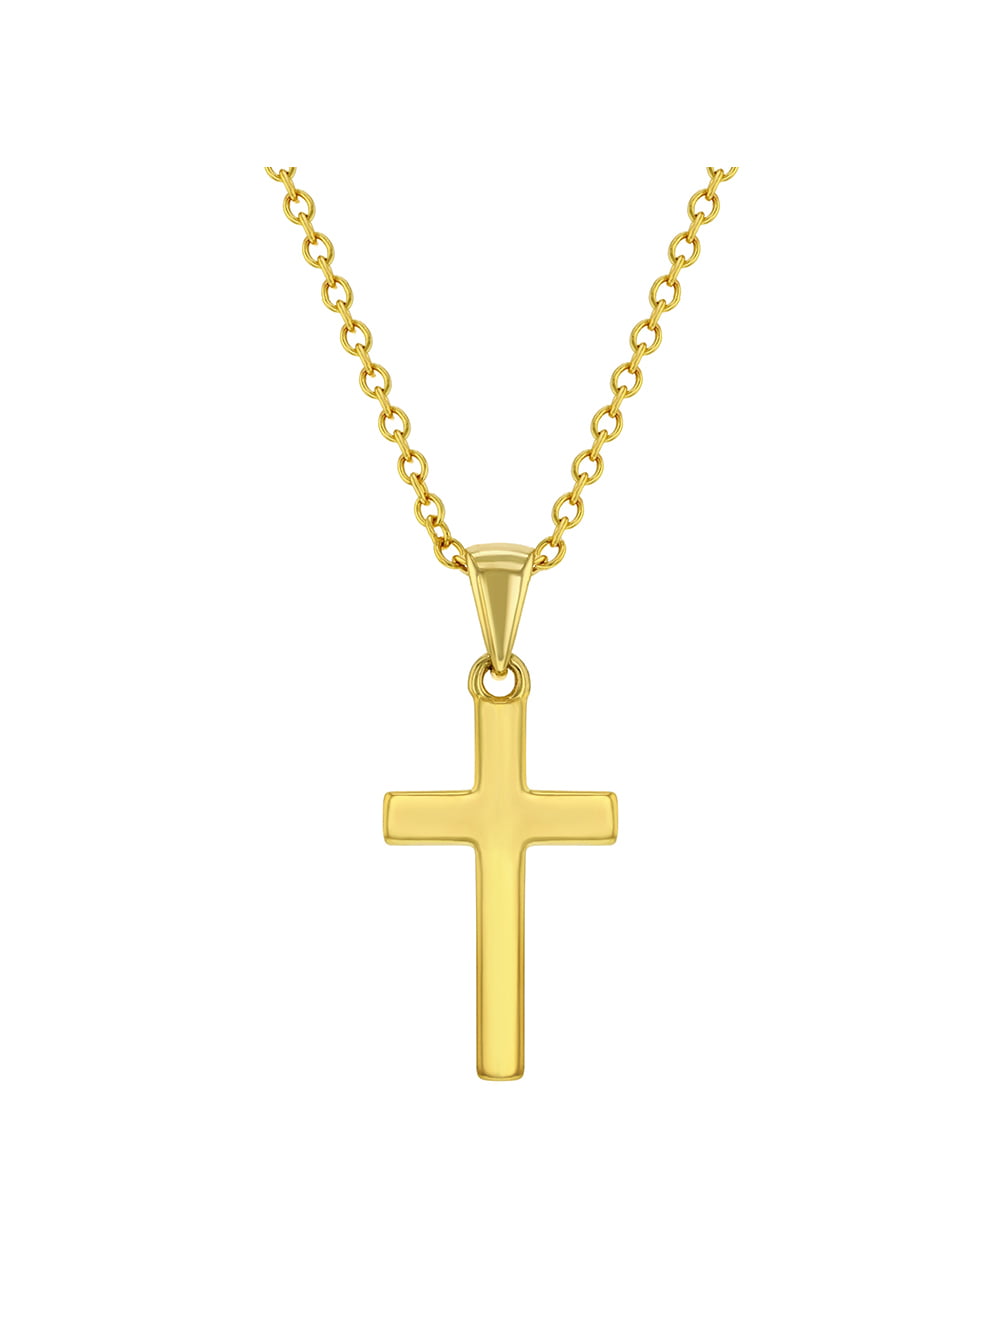 Shiny 925 Sterling Silver Plated Plain Cross Pendant Necklace 18" Chain Gift